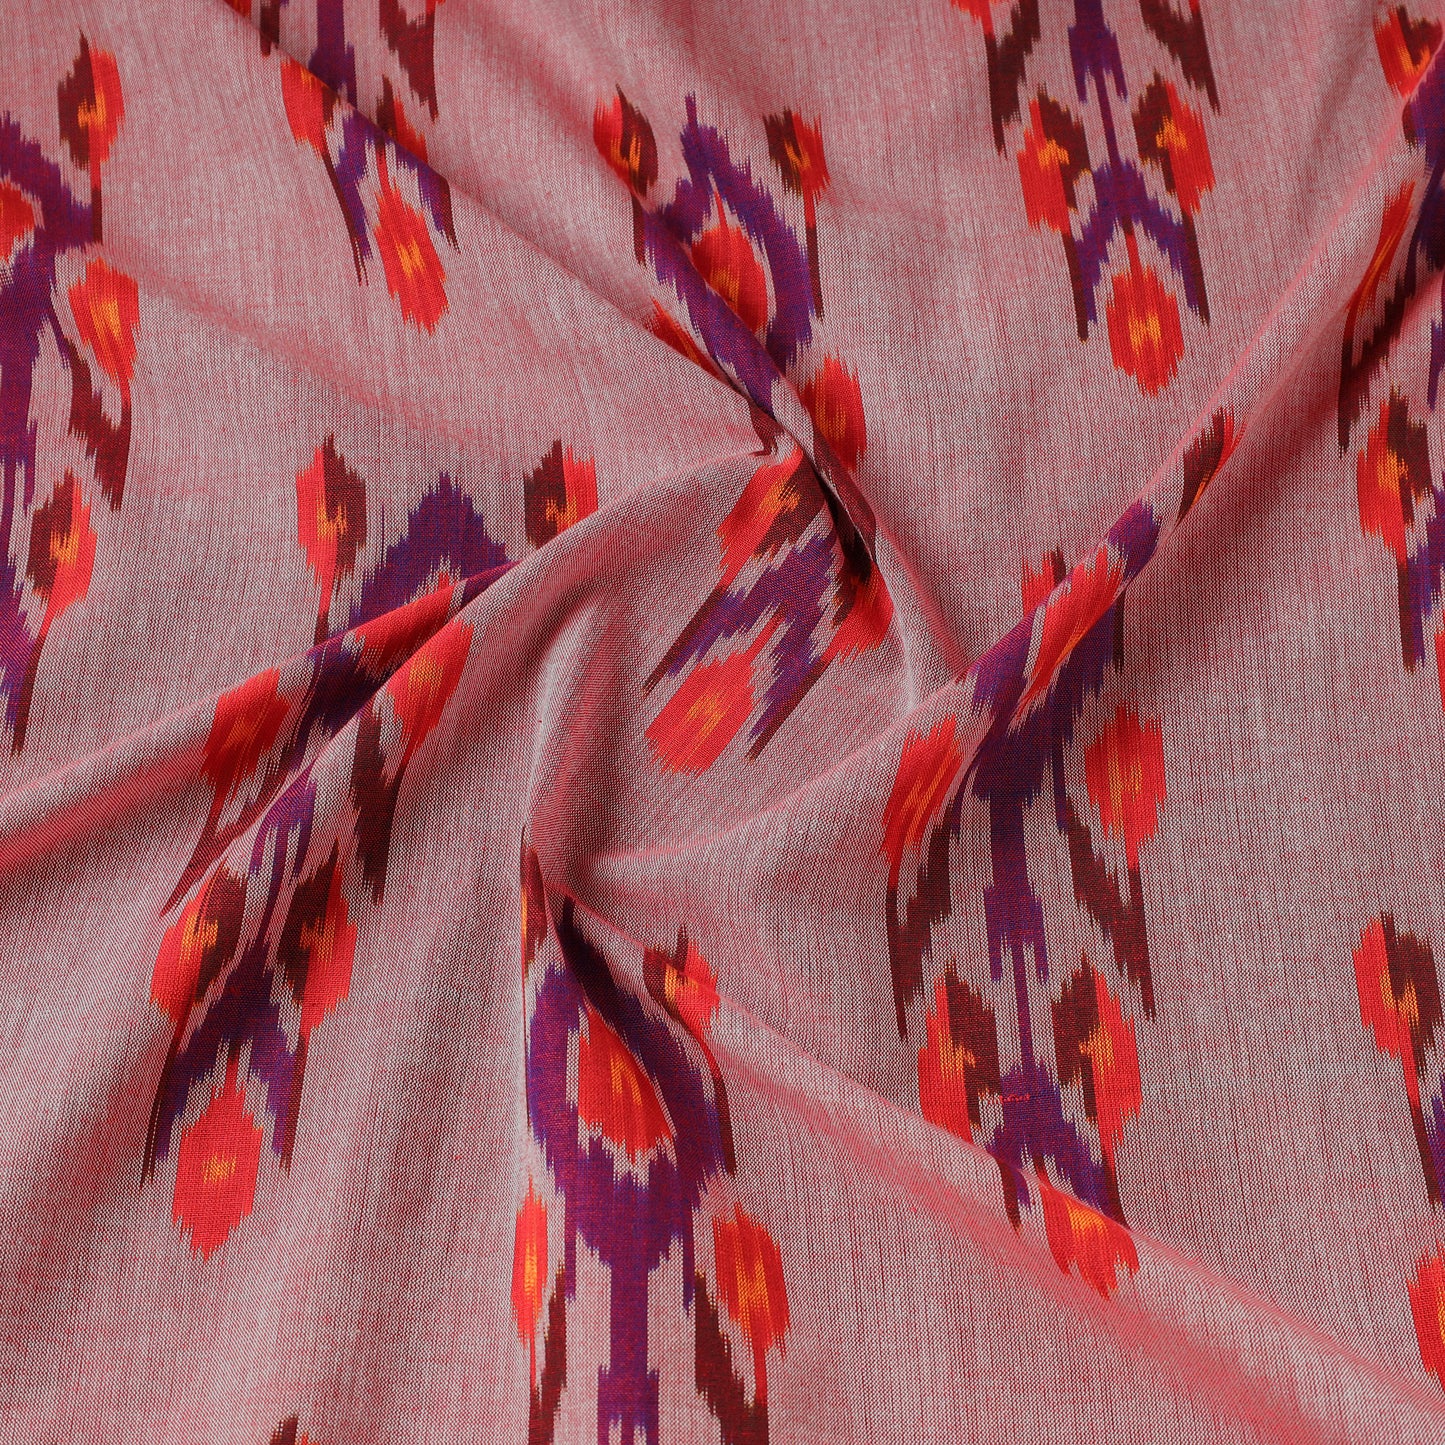 Large Violet Butta's On Pink Pochampally Central Asian Ikat Cotton Handloom Fabric